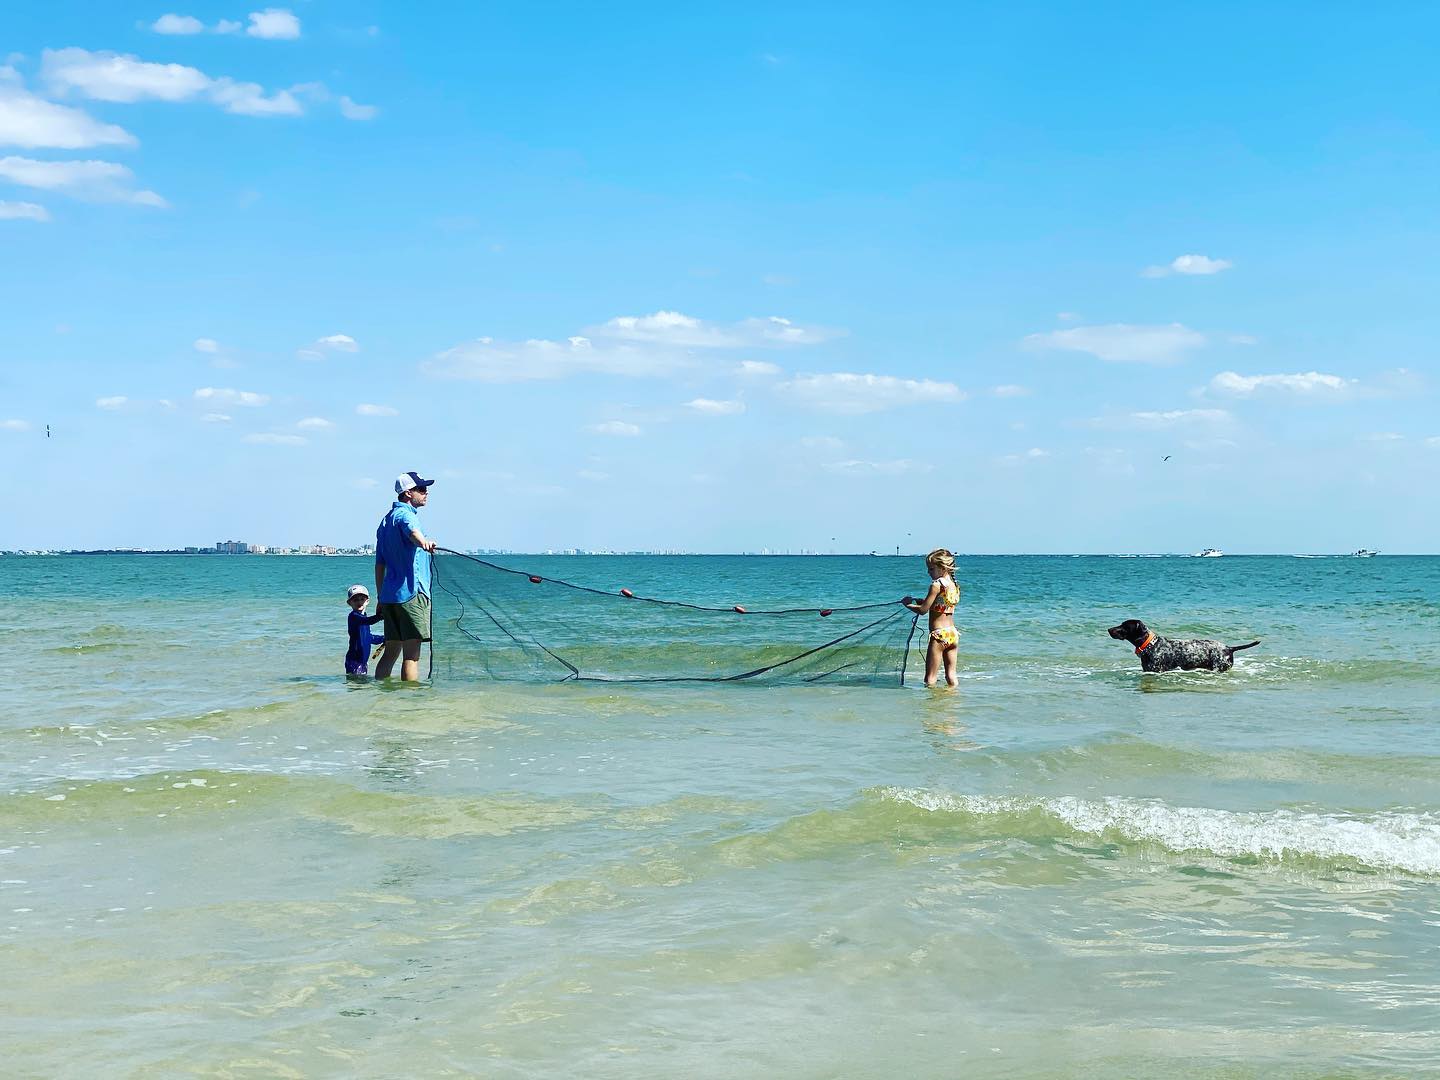 Two people throwing a cast net with dog nearby in the water.